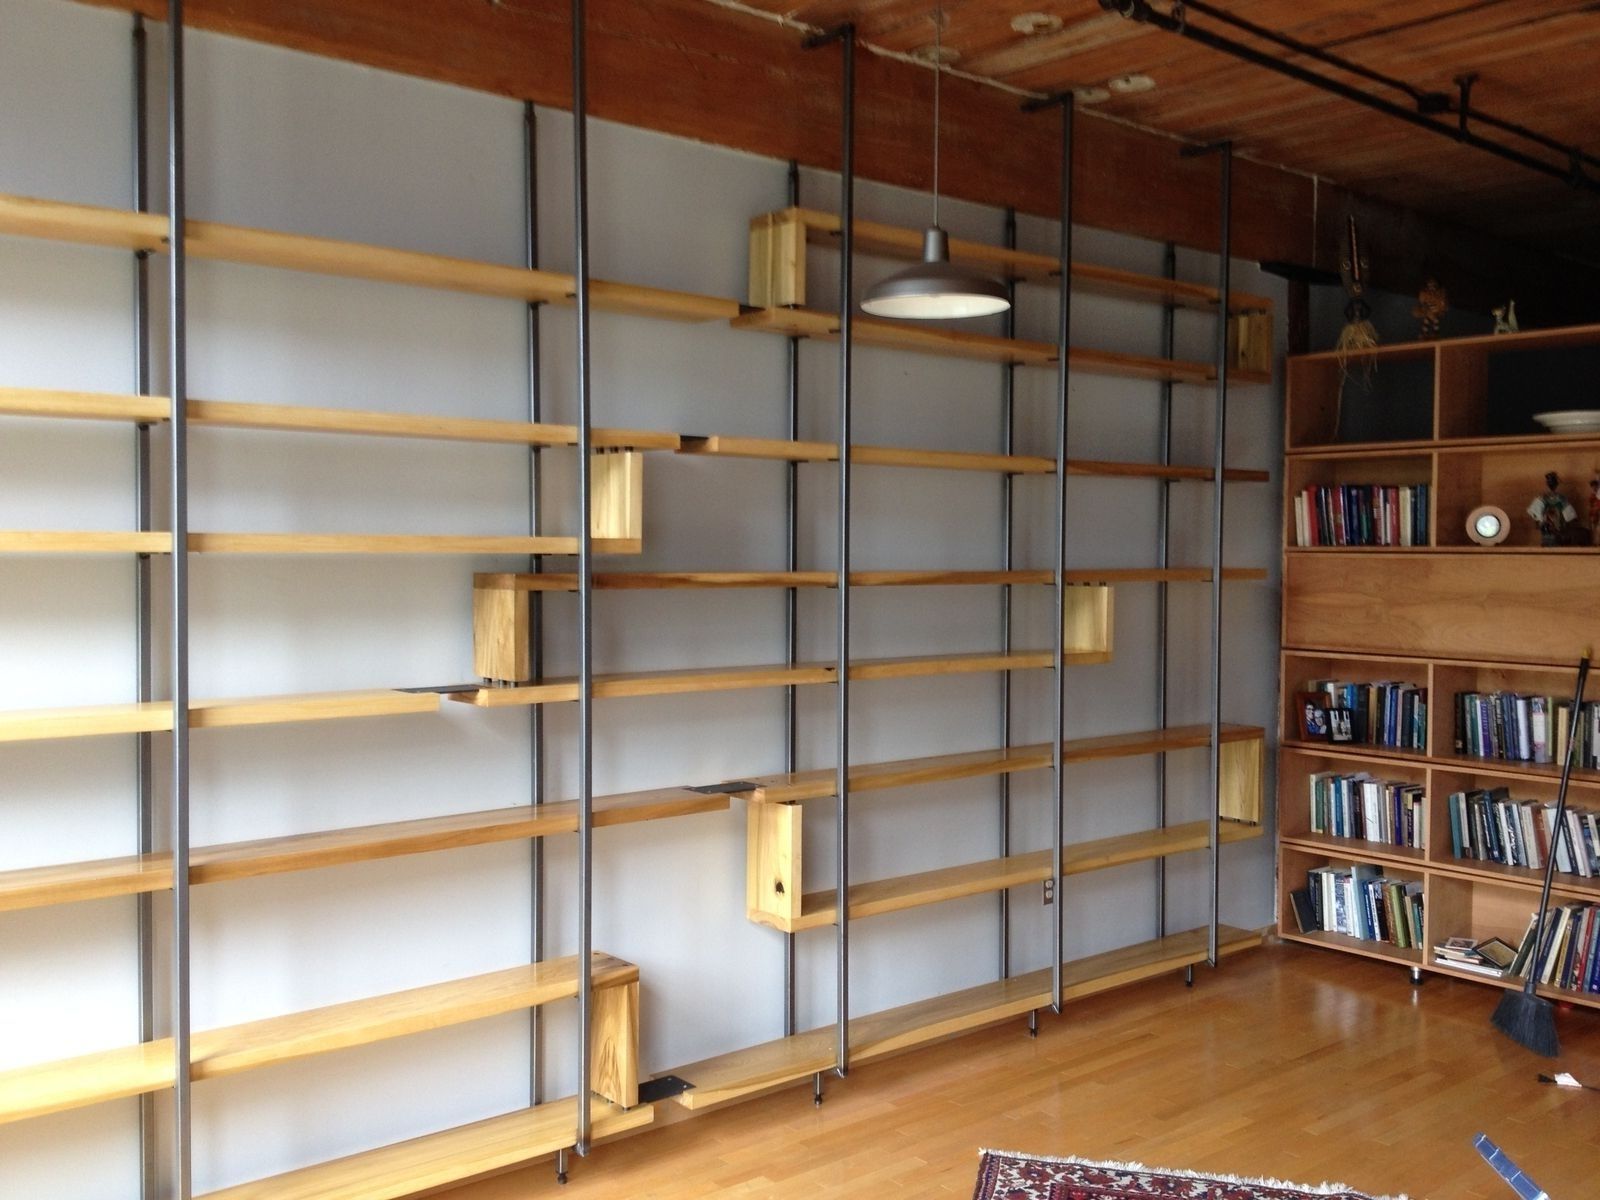 Famous Handmade Wood And Steel Floating Book Shelvesobject A Throughout Handmade Wooden Shelves (View 3 of 15)